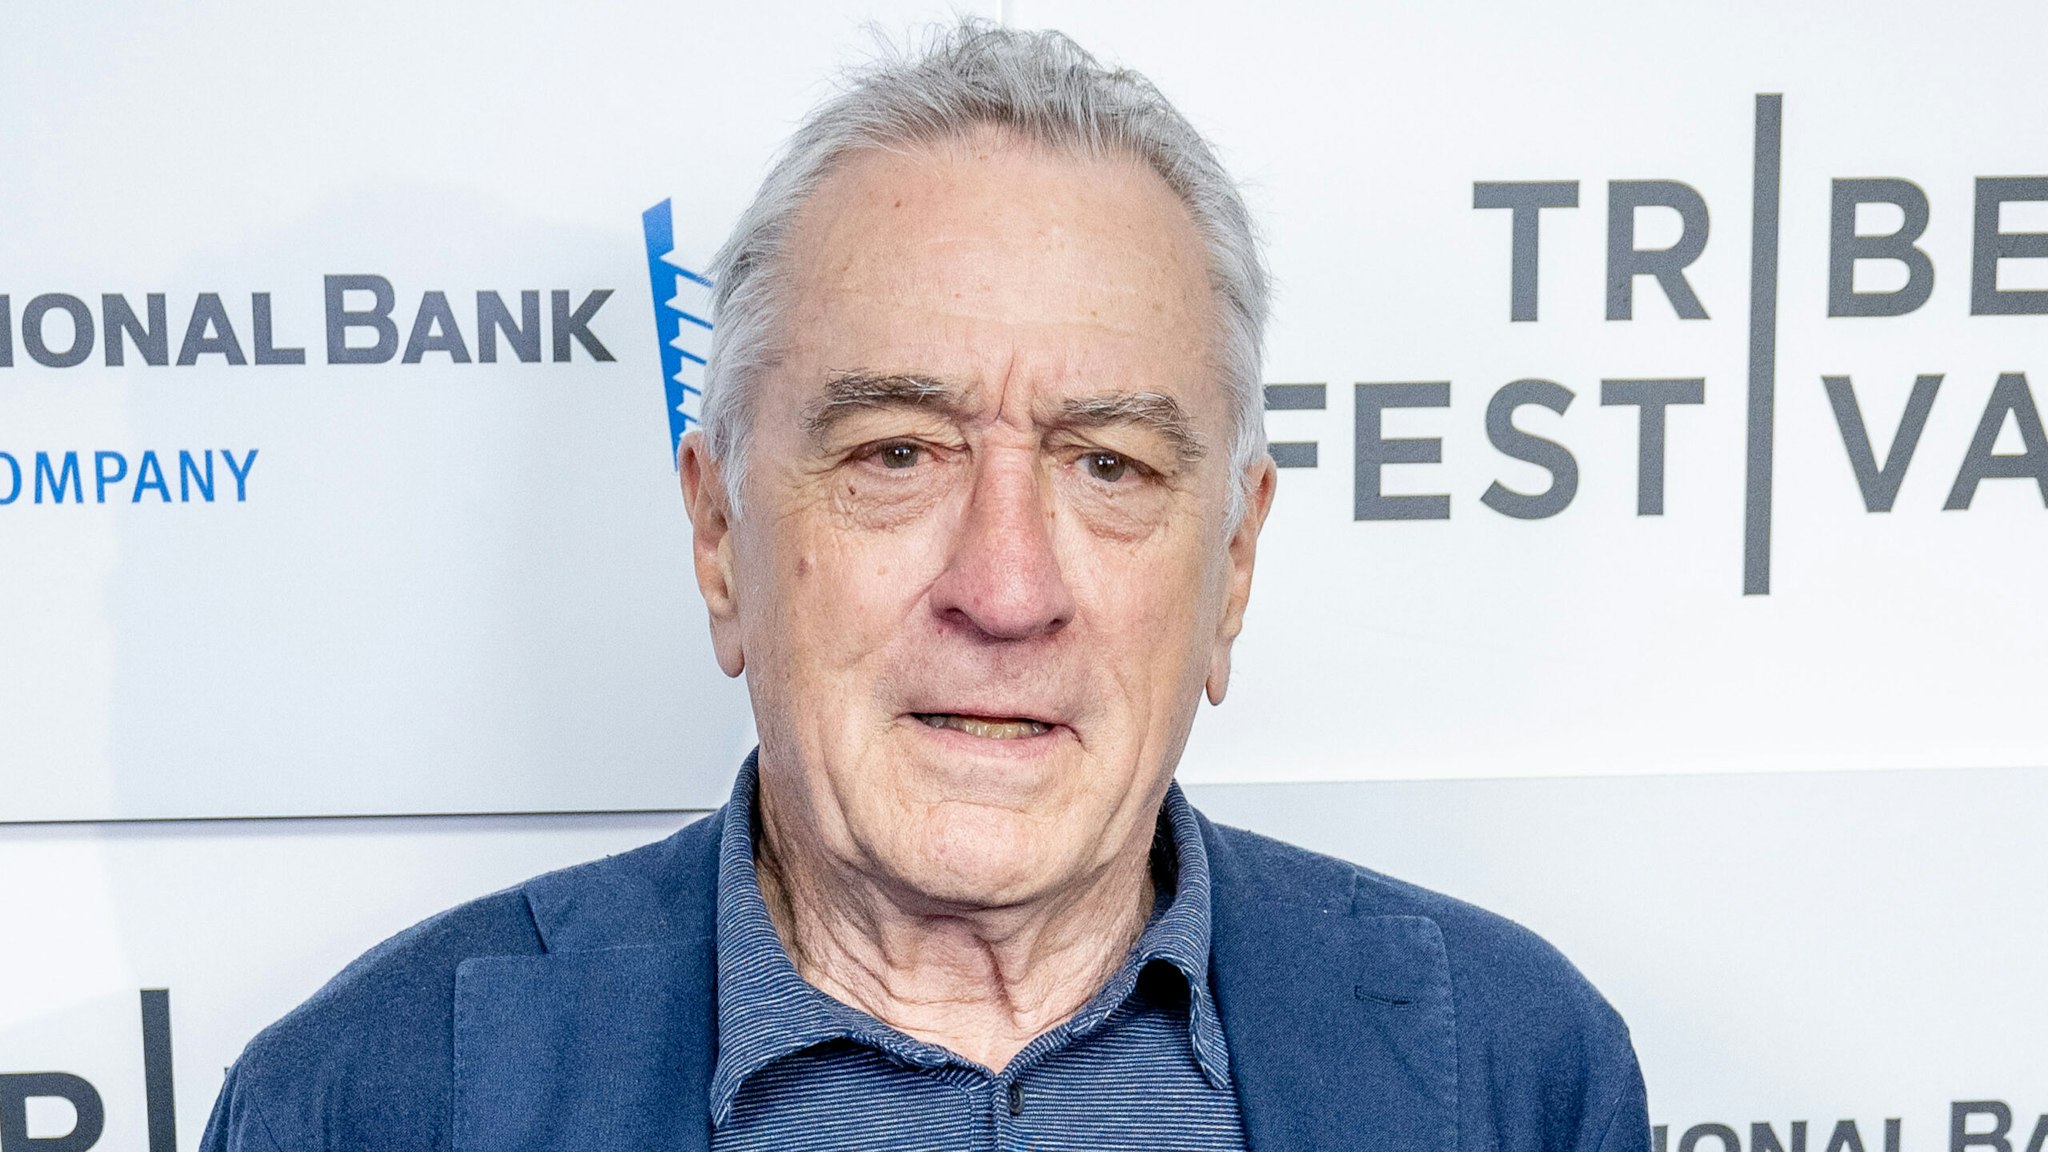 NEW YORK, NEW YORK - JUNE 17: Robert De Niro attends "A Bronx Tale" screening during the 2023 Tribeca Festival at Beacon Theatre on June 17, 2023 in New York City.